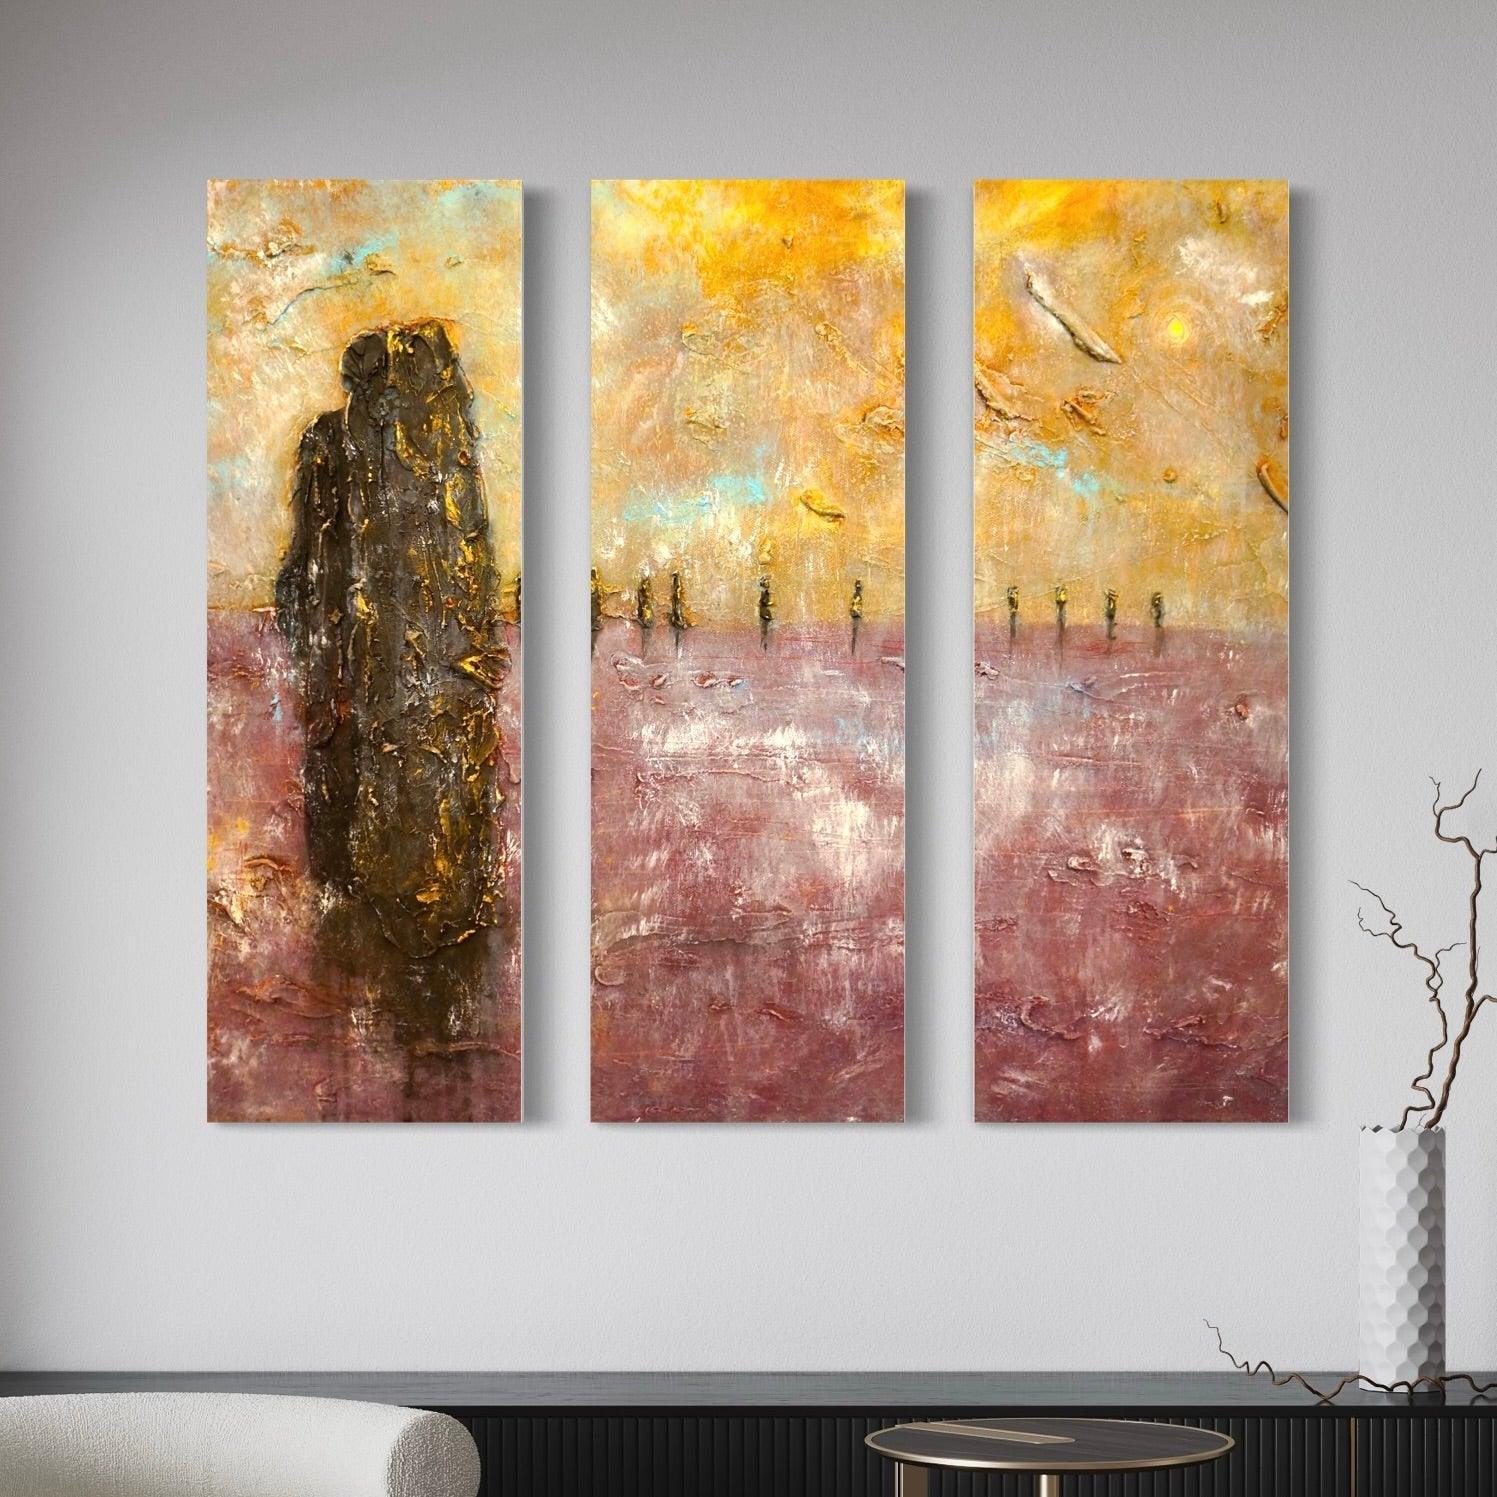 Brodgar Mist Orkney Painting Signed Fine Art Triptych Canvas-Statement Wall Art-Orkney Art Gallery-Paintings, Prints, Homeware, Art Gifts From Scotland By Scottish Artist Kevin Hunter